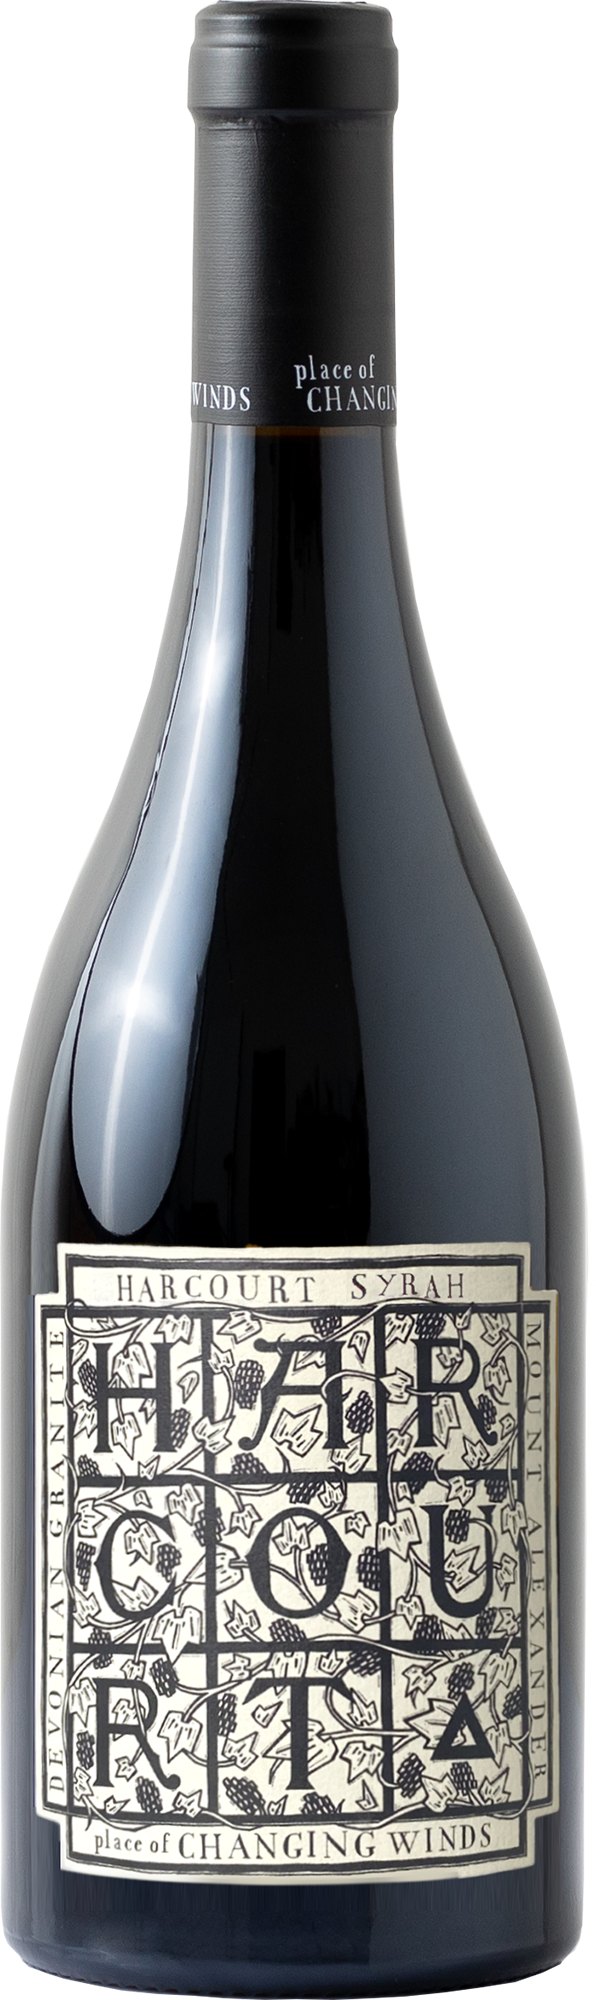 Place of Changing Winds Harcourt Syrah 2021